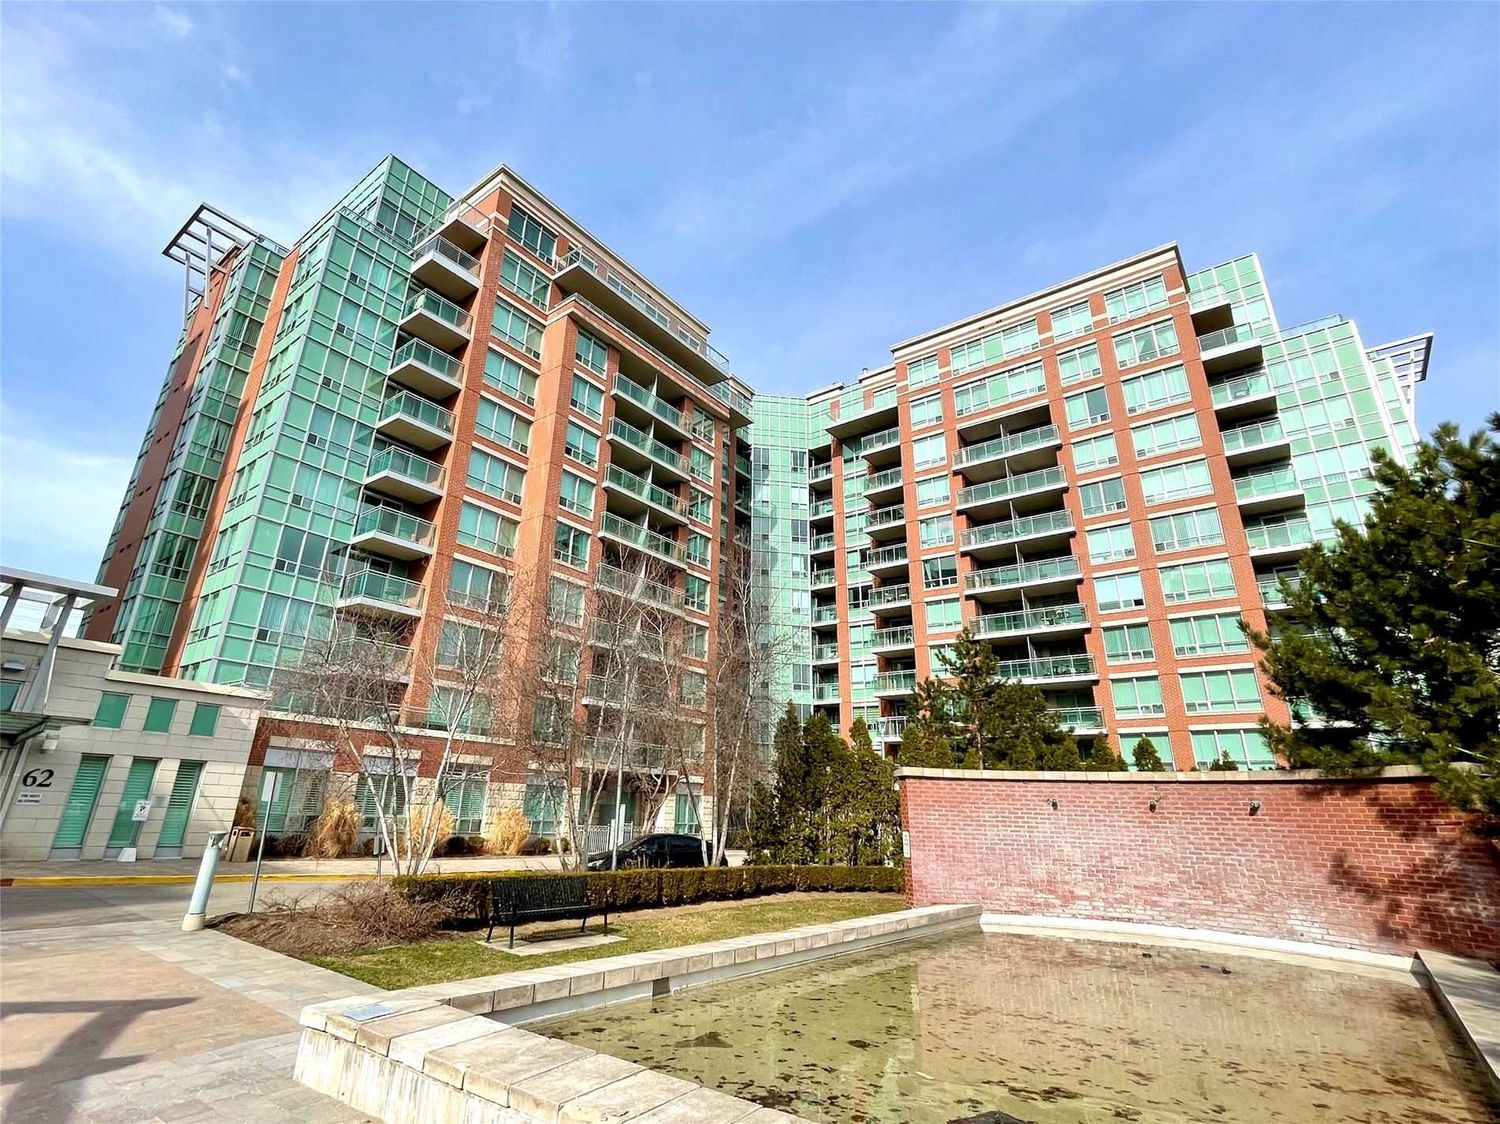 62 Suncrest Boulevard. Thornhill Towers Condos is located in  Markham, Toronto - image #2 of 2